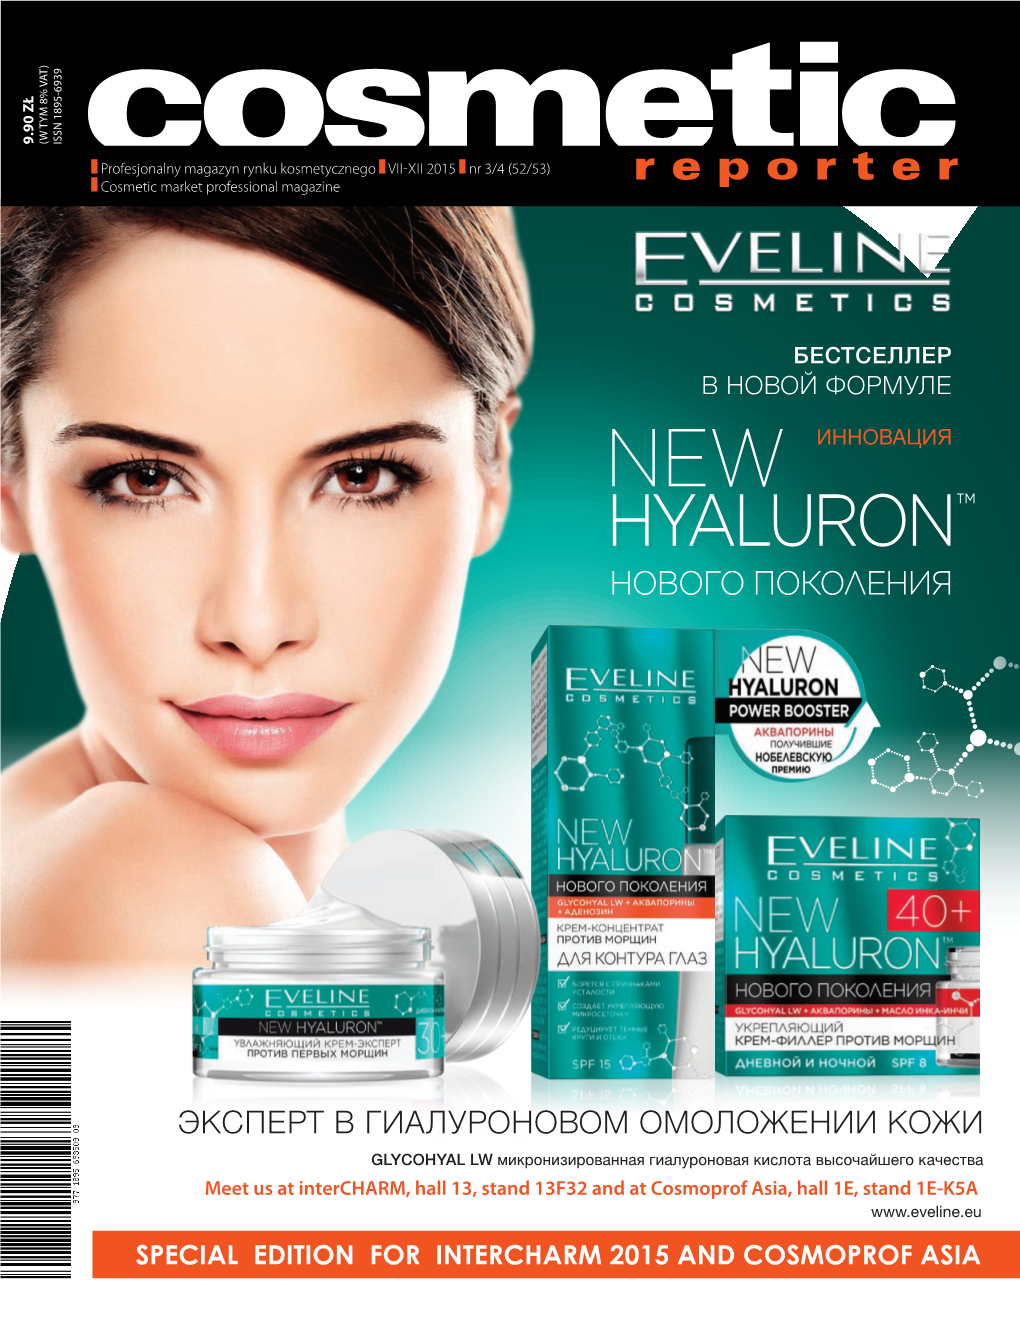 SPECIAL EDITION for Intercharm 2015 and Cosmoprof ASIA